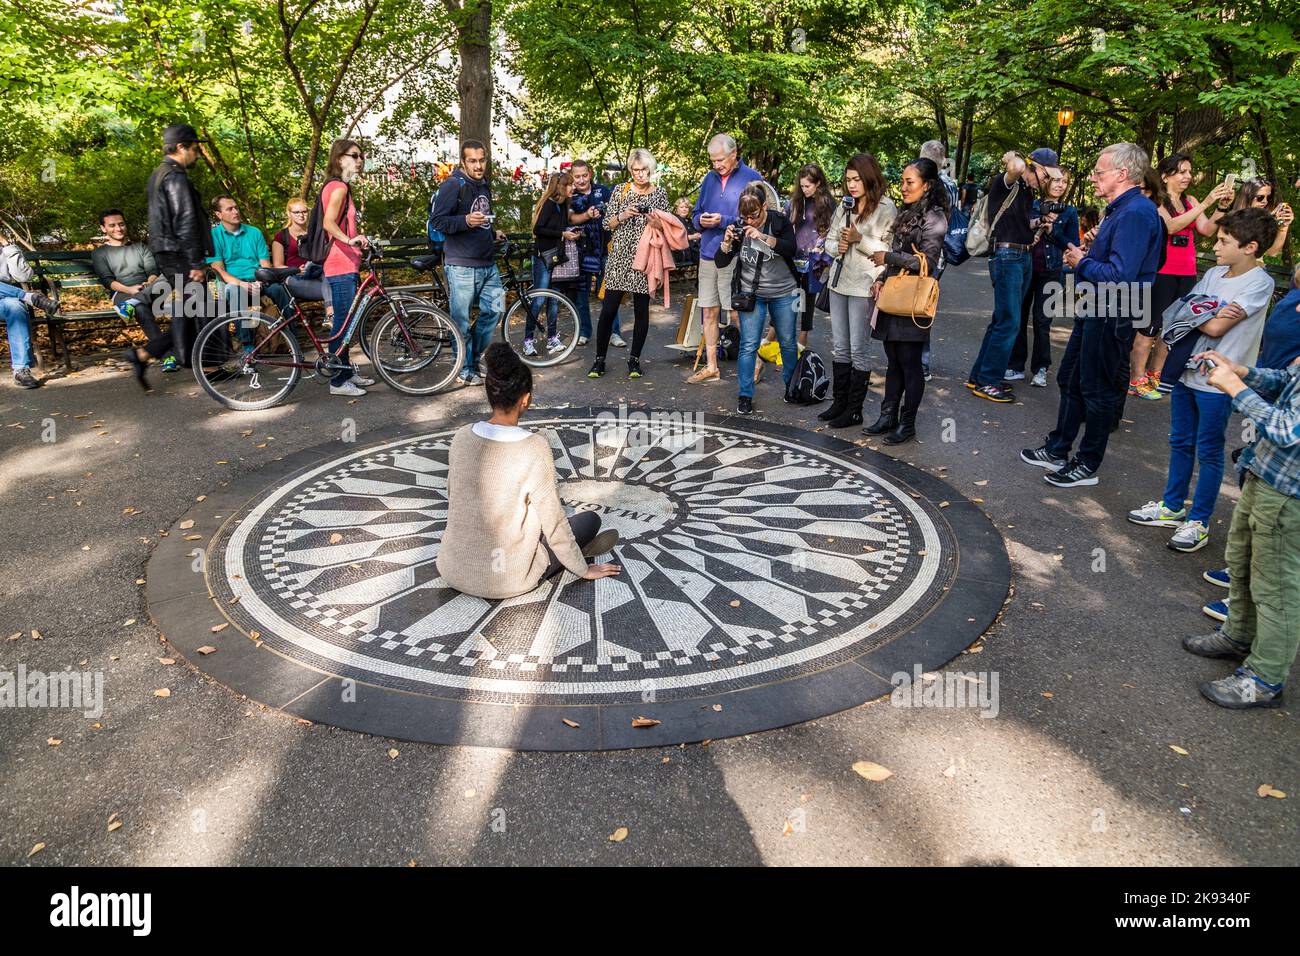 New York, USA - OCT 21, 2015: people having their picture taken on the IMAGINE mosaic in Strawberry Fields Central Park in Manhattan. People come all Stock Photo